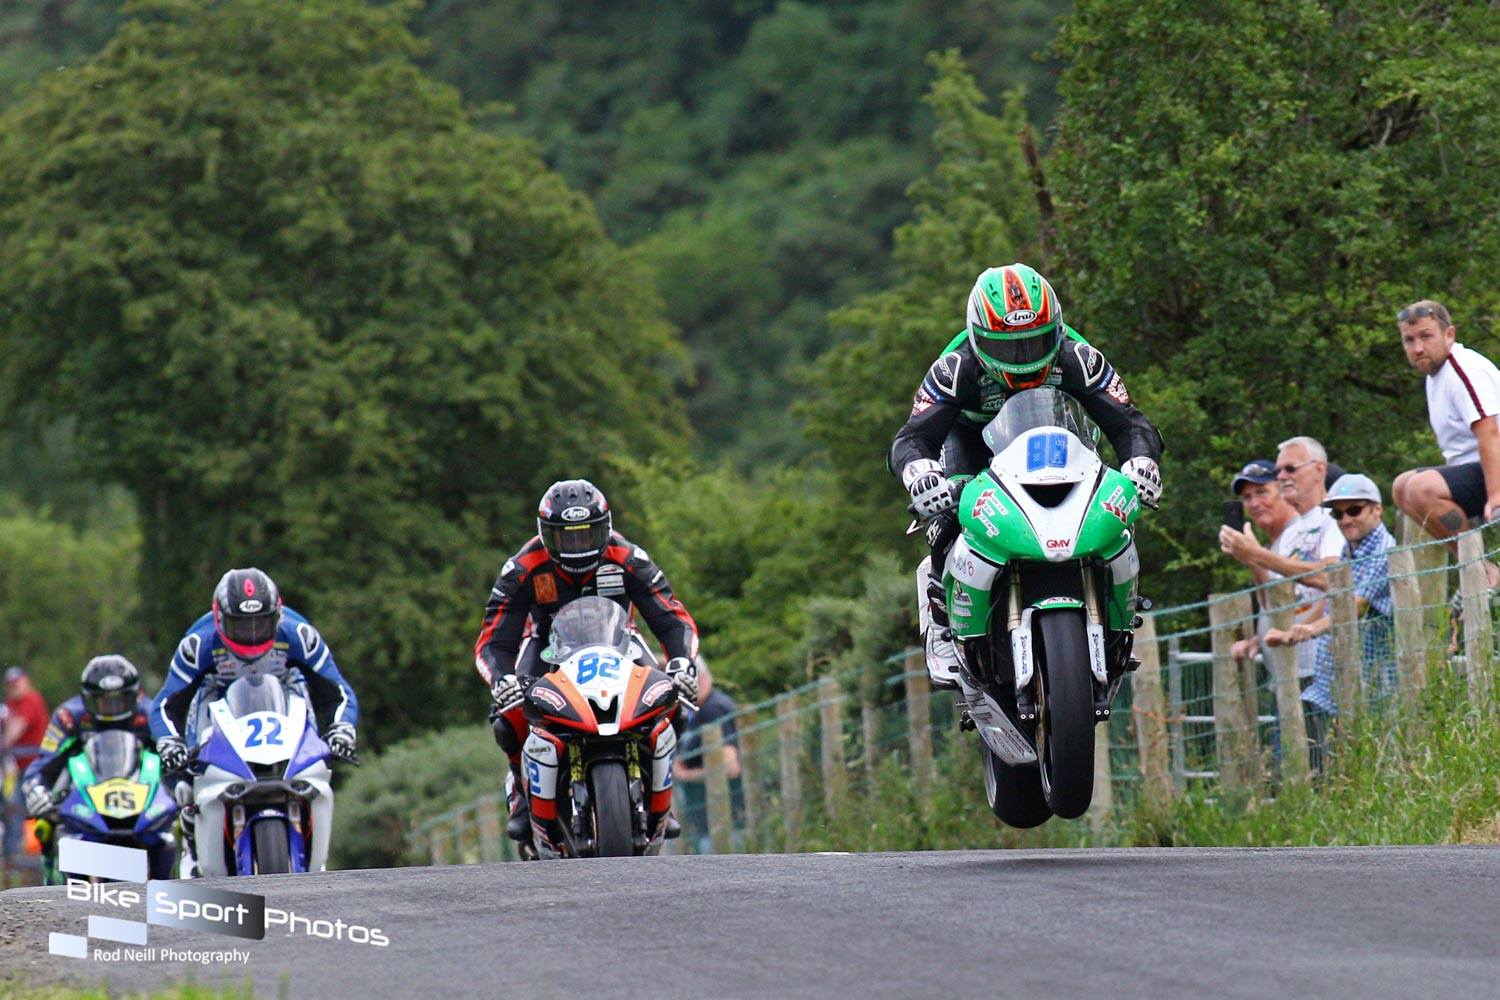 Armoy: McGee Awarded Hilton Car Sales Supersport Success After Photo Finish